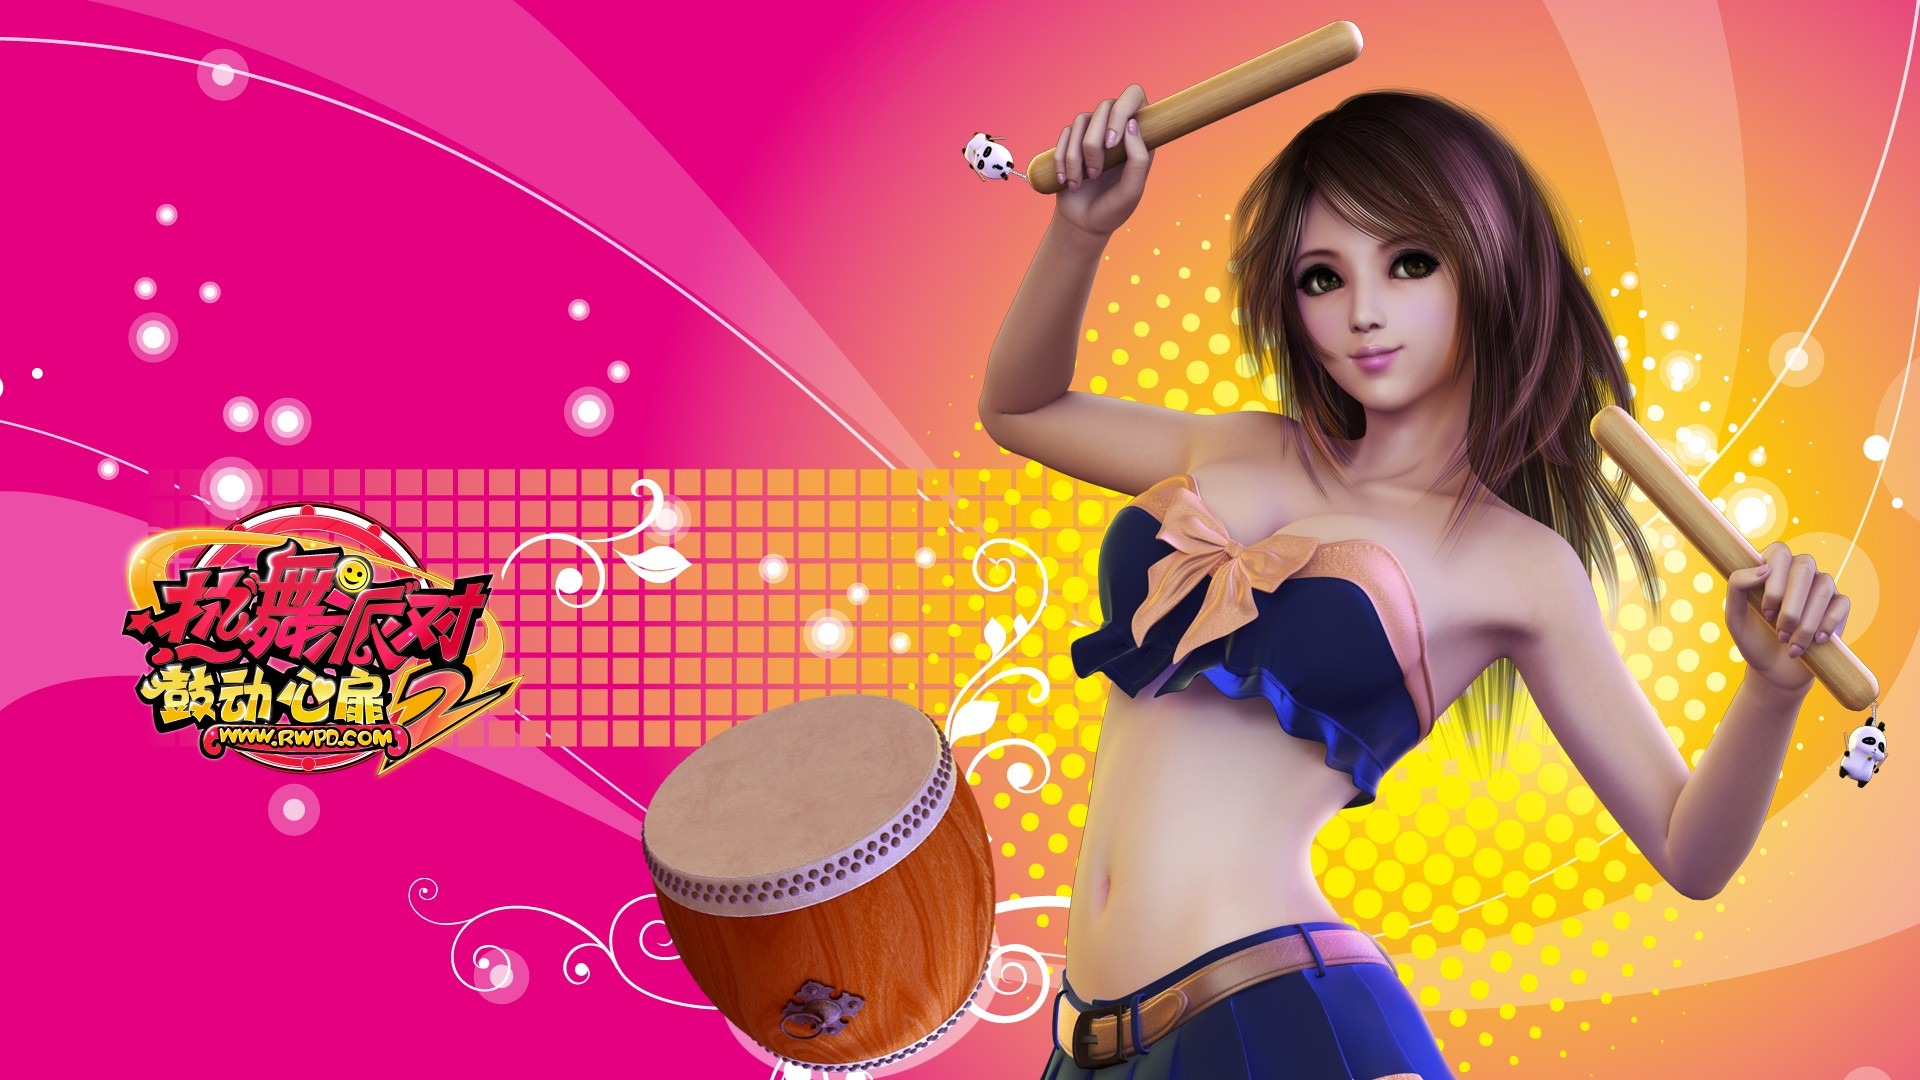 Online game Hot Dance Party II official wallpapers #22 - 1920x1080